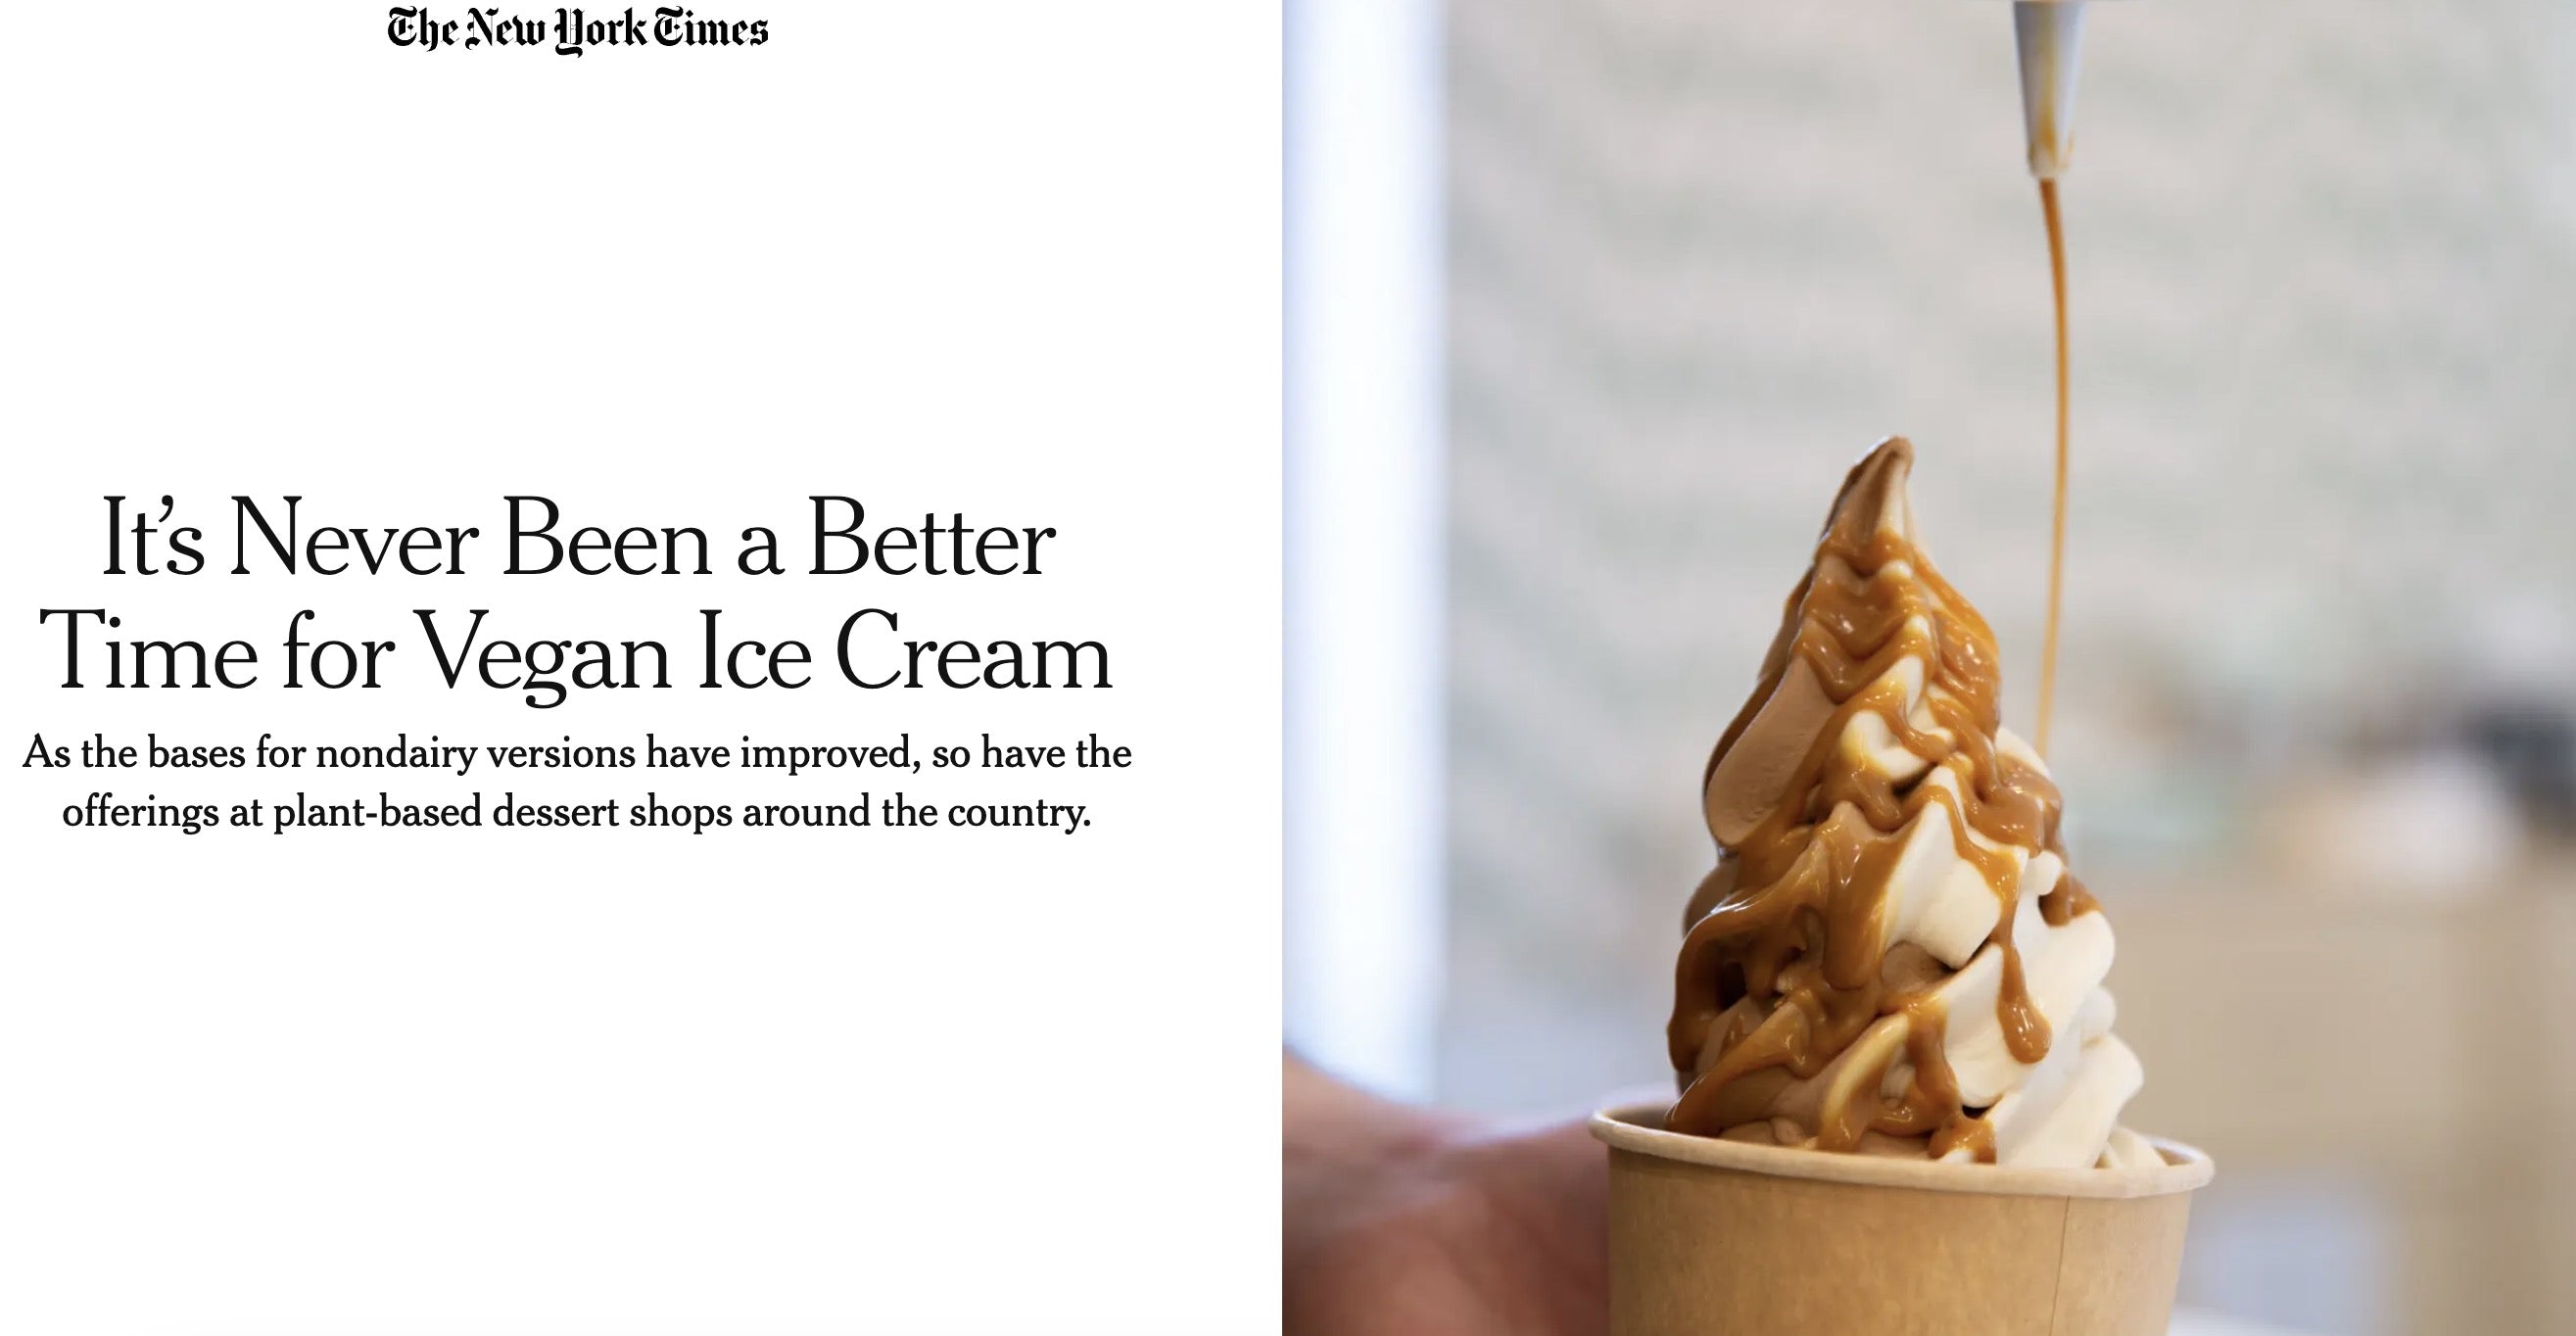 It's never been a better time for vegan ice cream